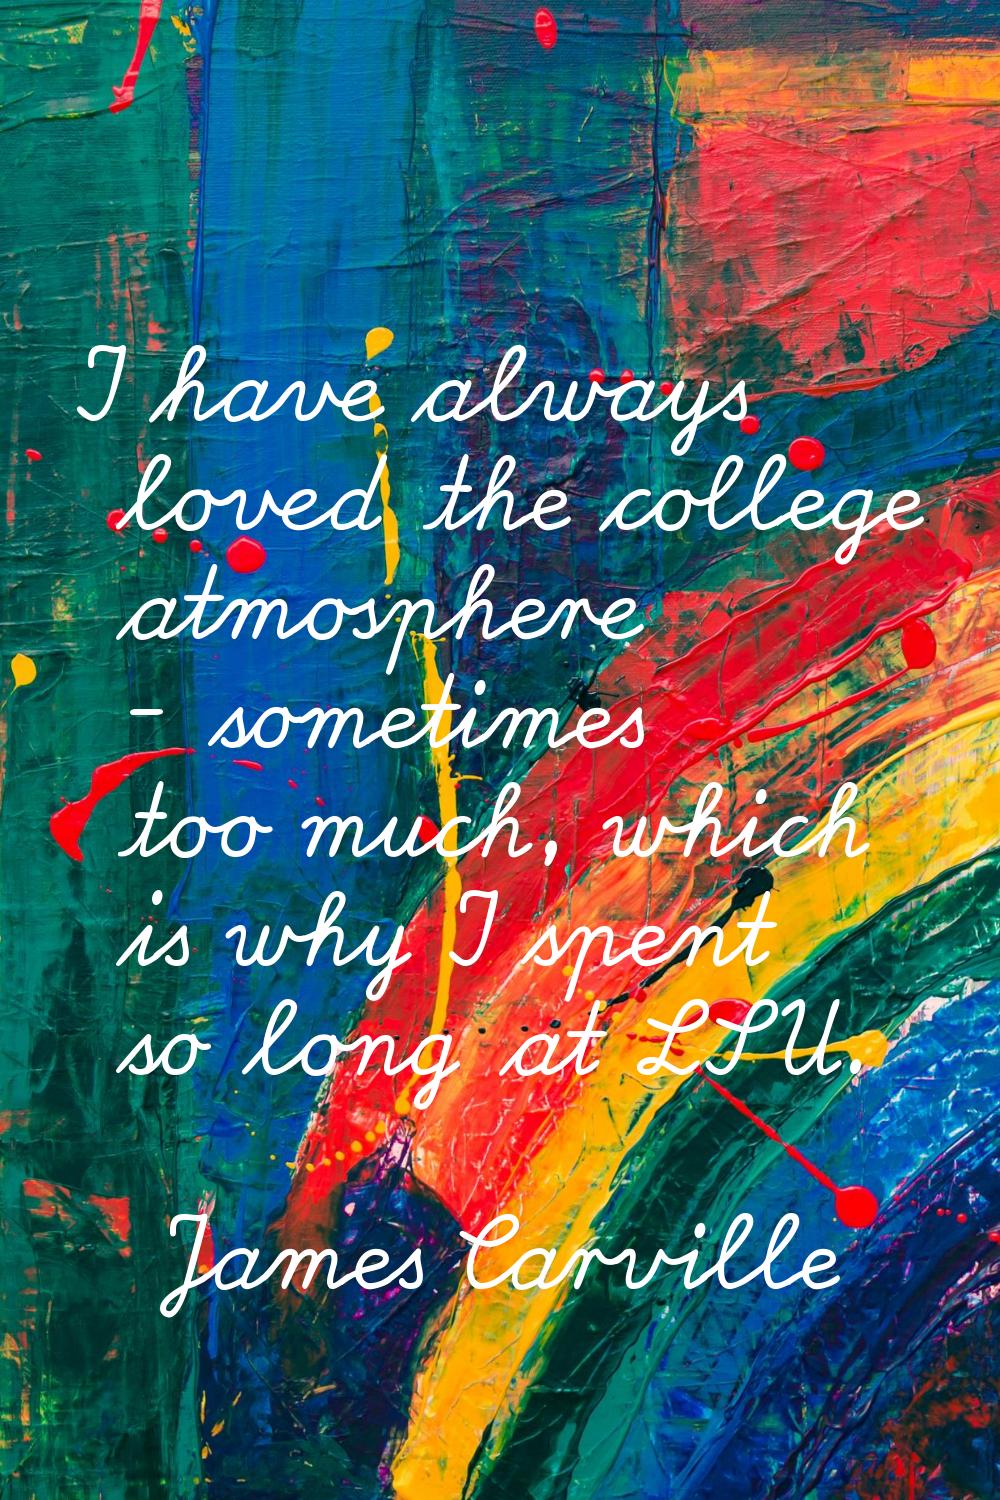 I have always loved the college atmosphere - sometimes too much, which is why I spent so long at LS